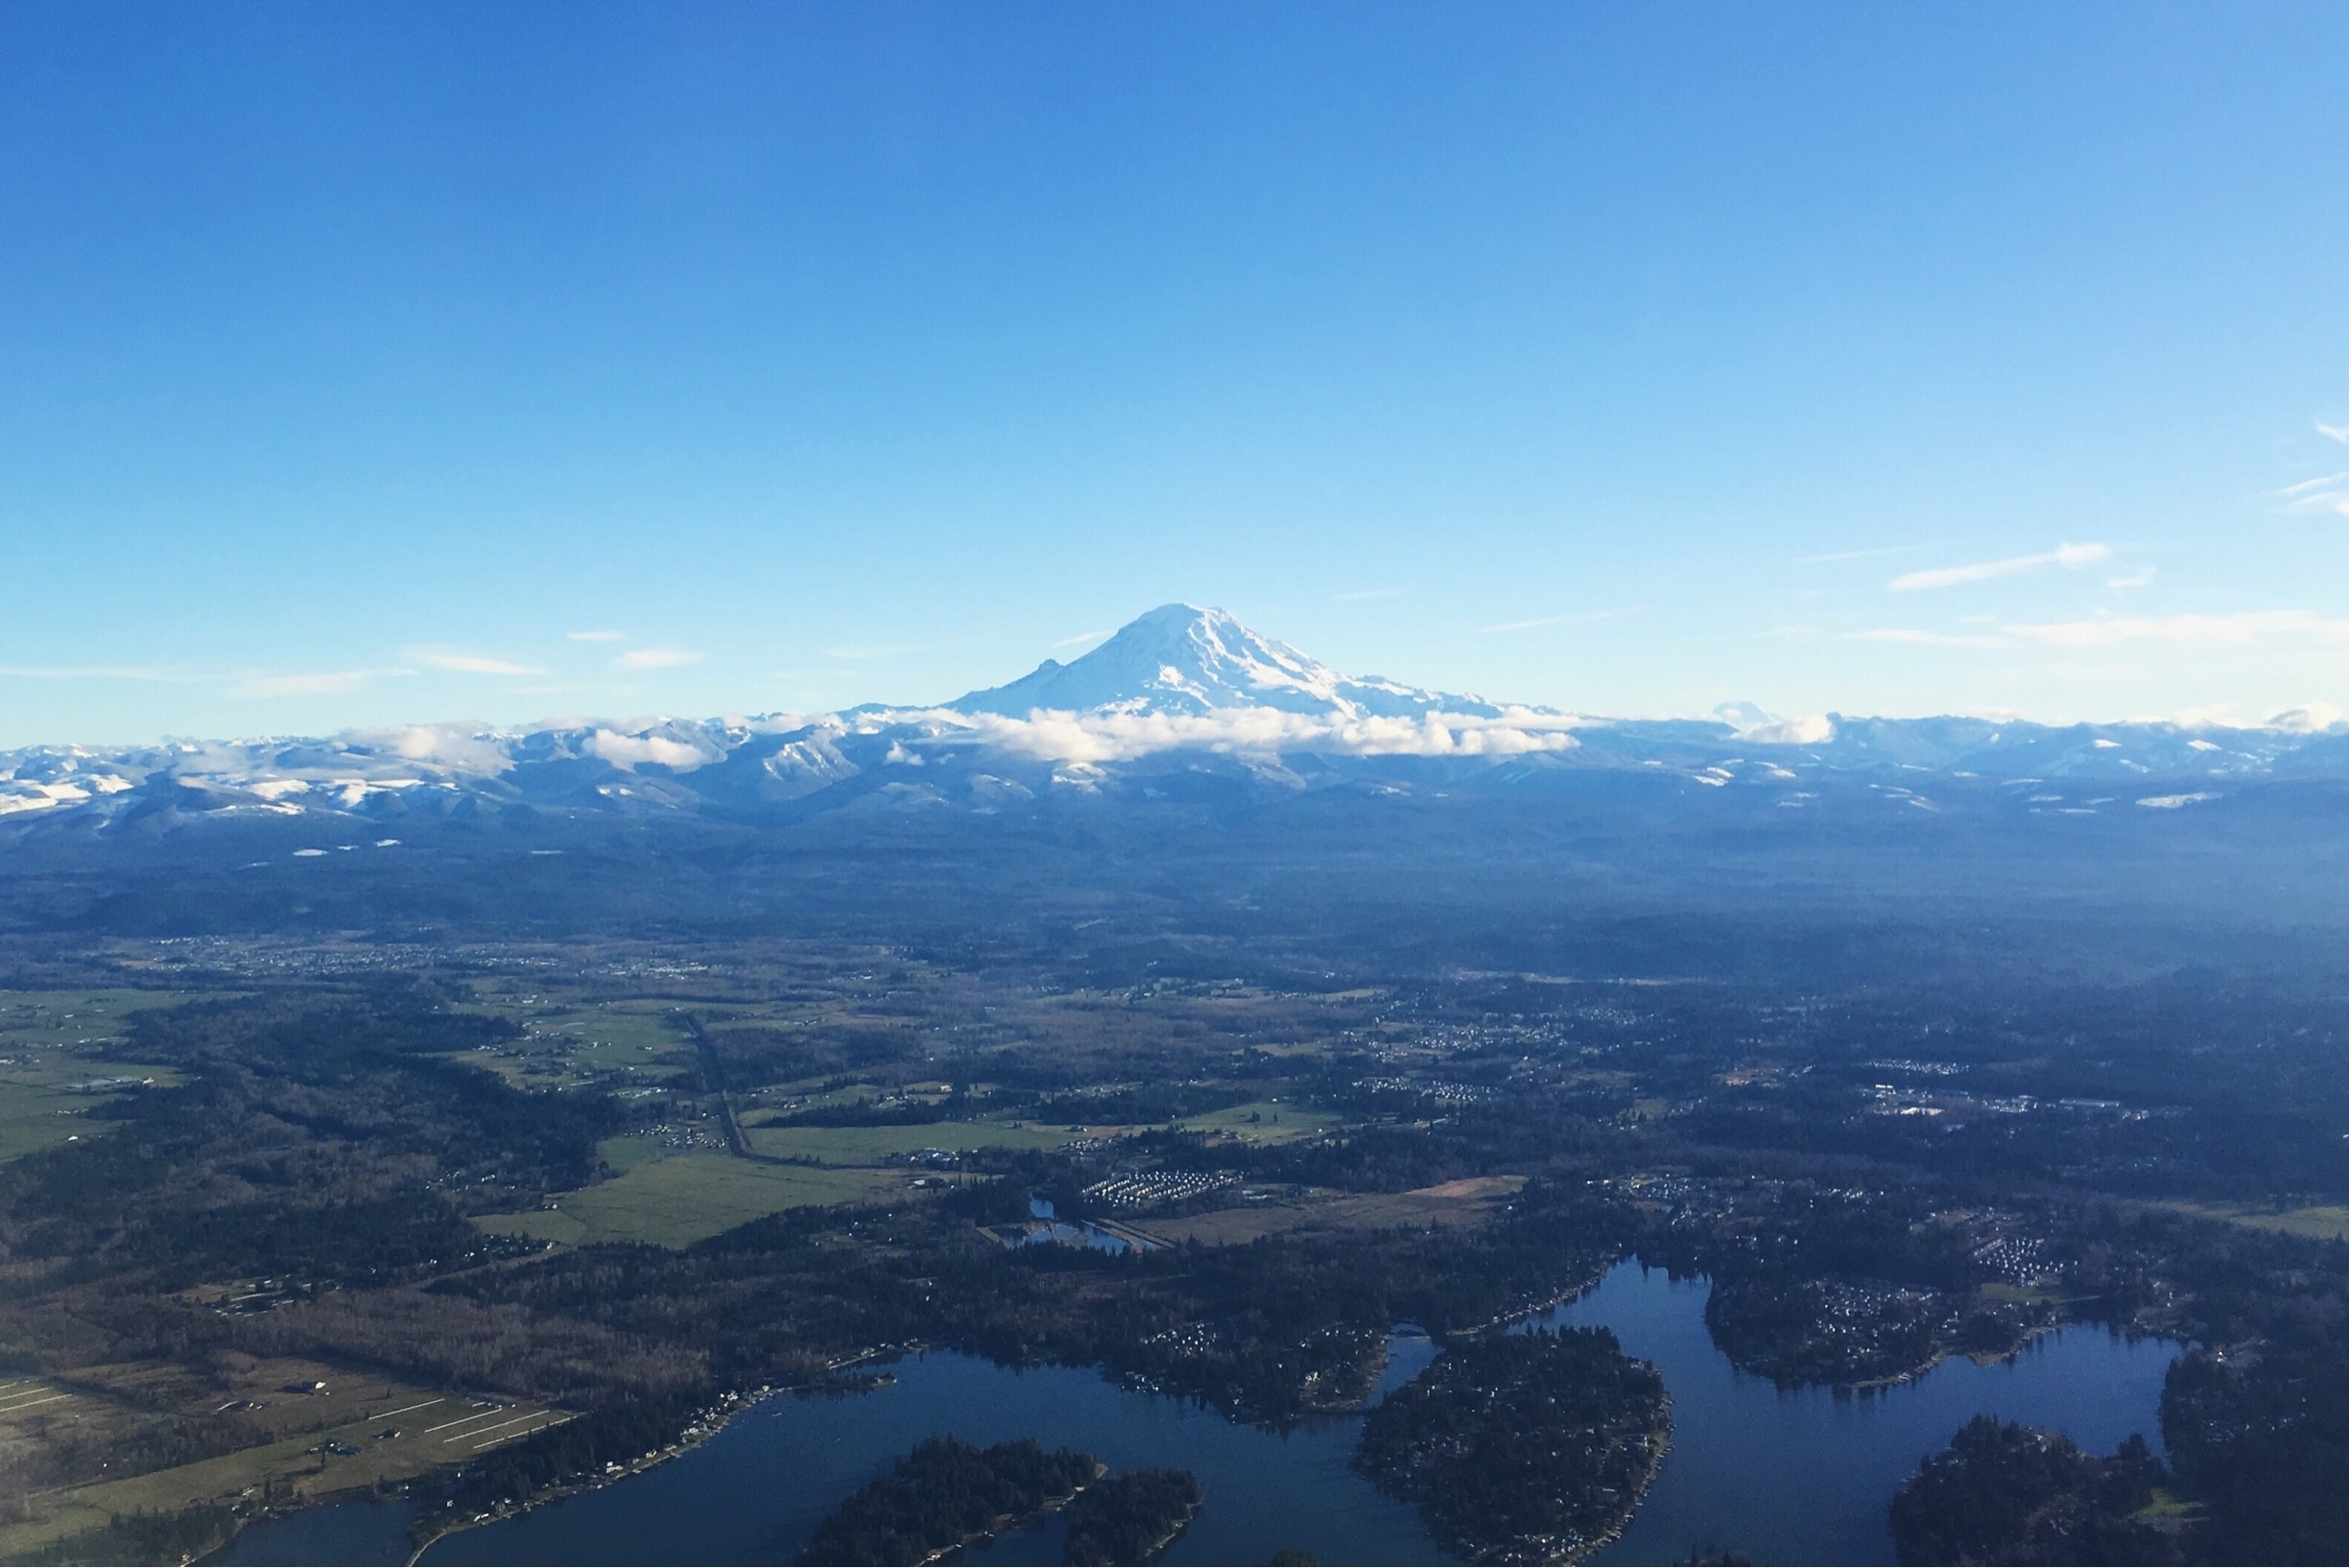 Shot of #MountRainier from the plane #lifeatexpedia